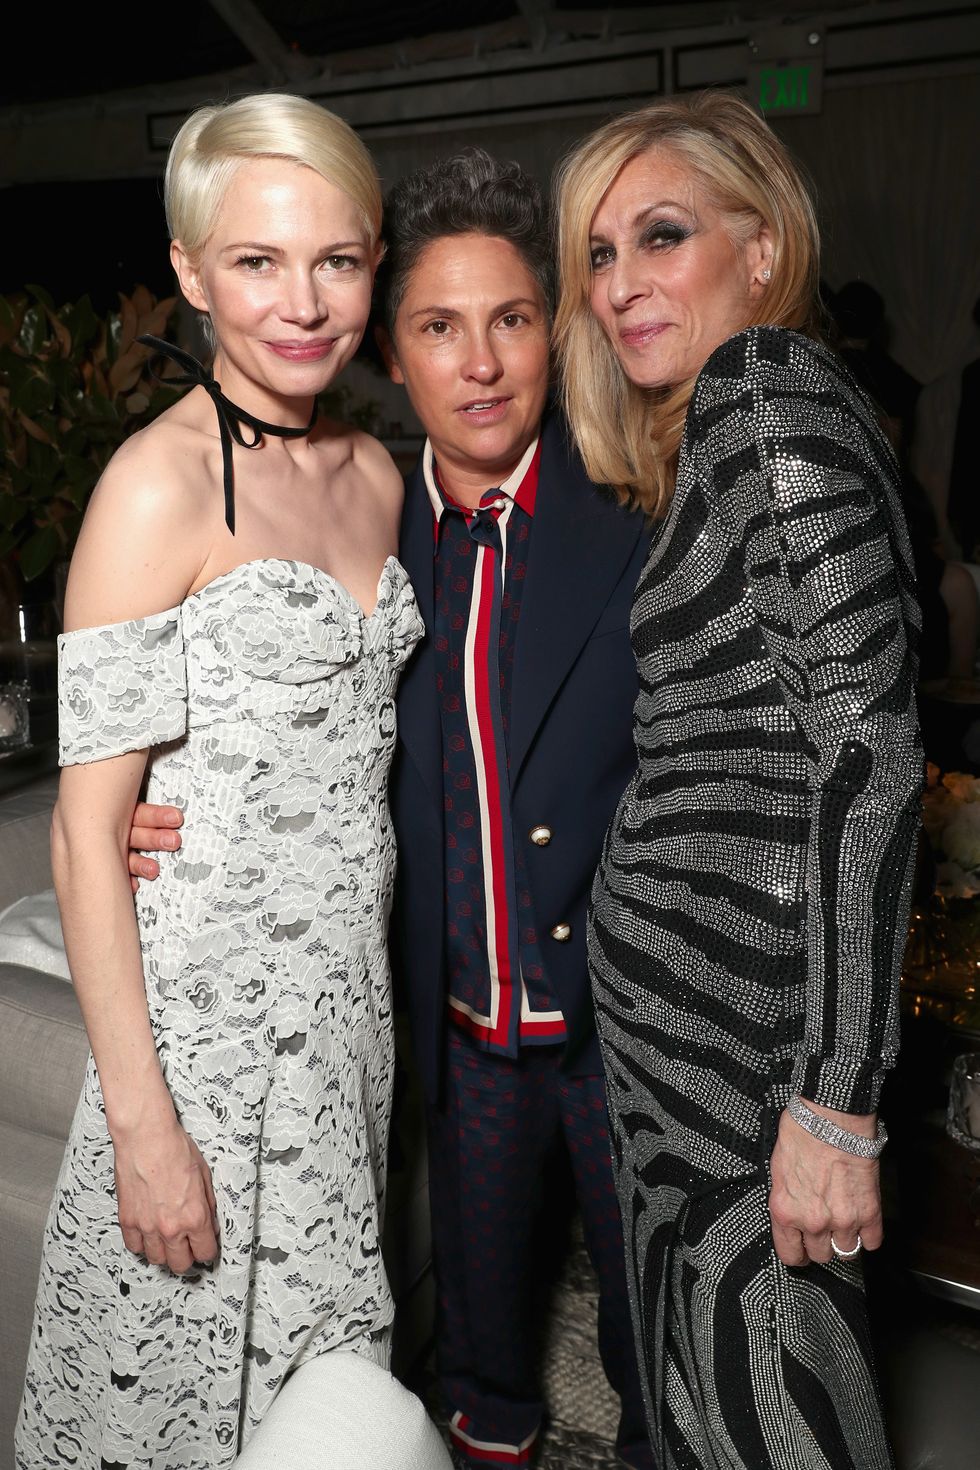 BEVERLY HILLS, CA - JANUARY 08:  (L-R) Actress Michelle Williams, director Jill Soloway, and actress Judith Light attend Amazon Studios Golden Globes Celebration at The Beverly Hilton Hotel on January 8, 2017 in Beverly Hills, California.  (Photo by Todd Williamson/Getty Images for Amazon)